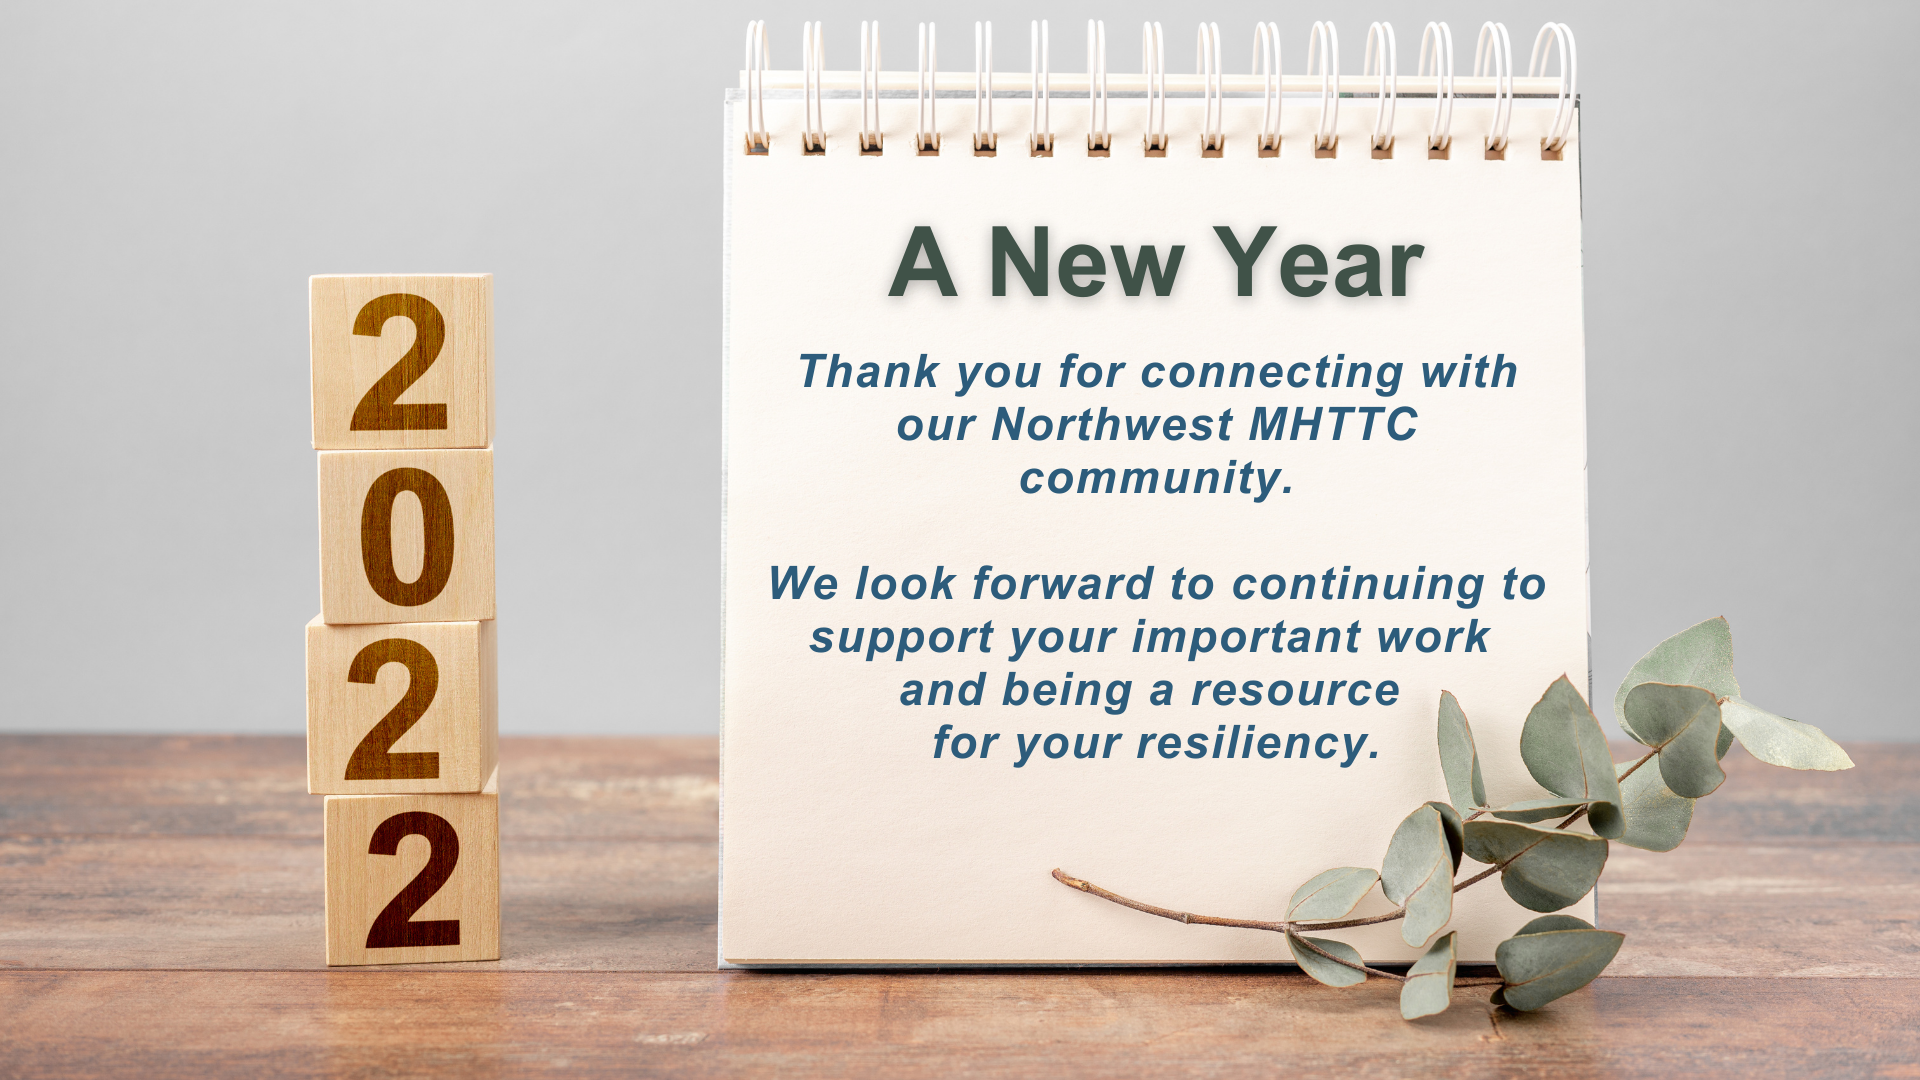 A New Year. Thank you for connecting with our Northwest MHTTC community. We look forward to continuing to support your important work and being a resource for your resiliency.